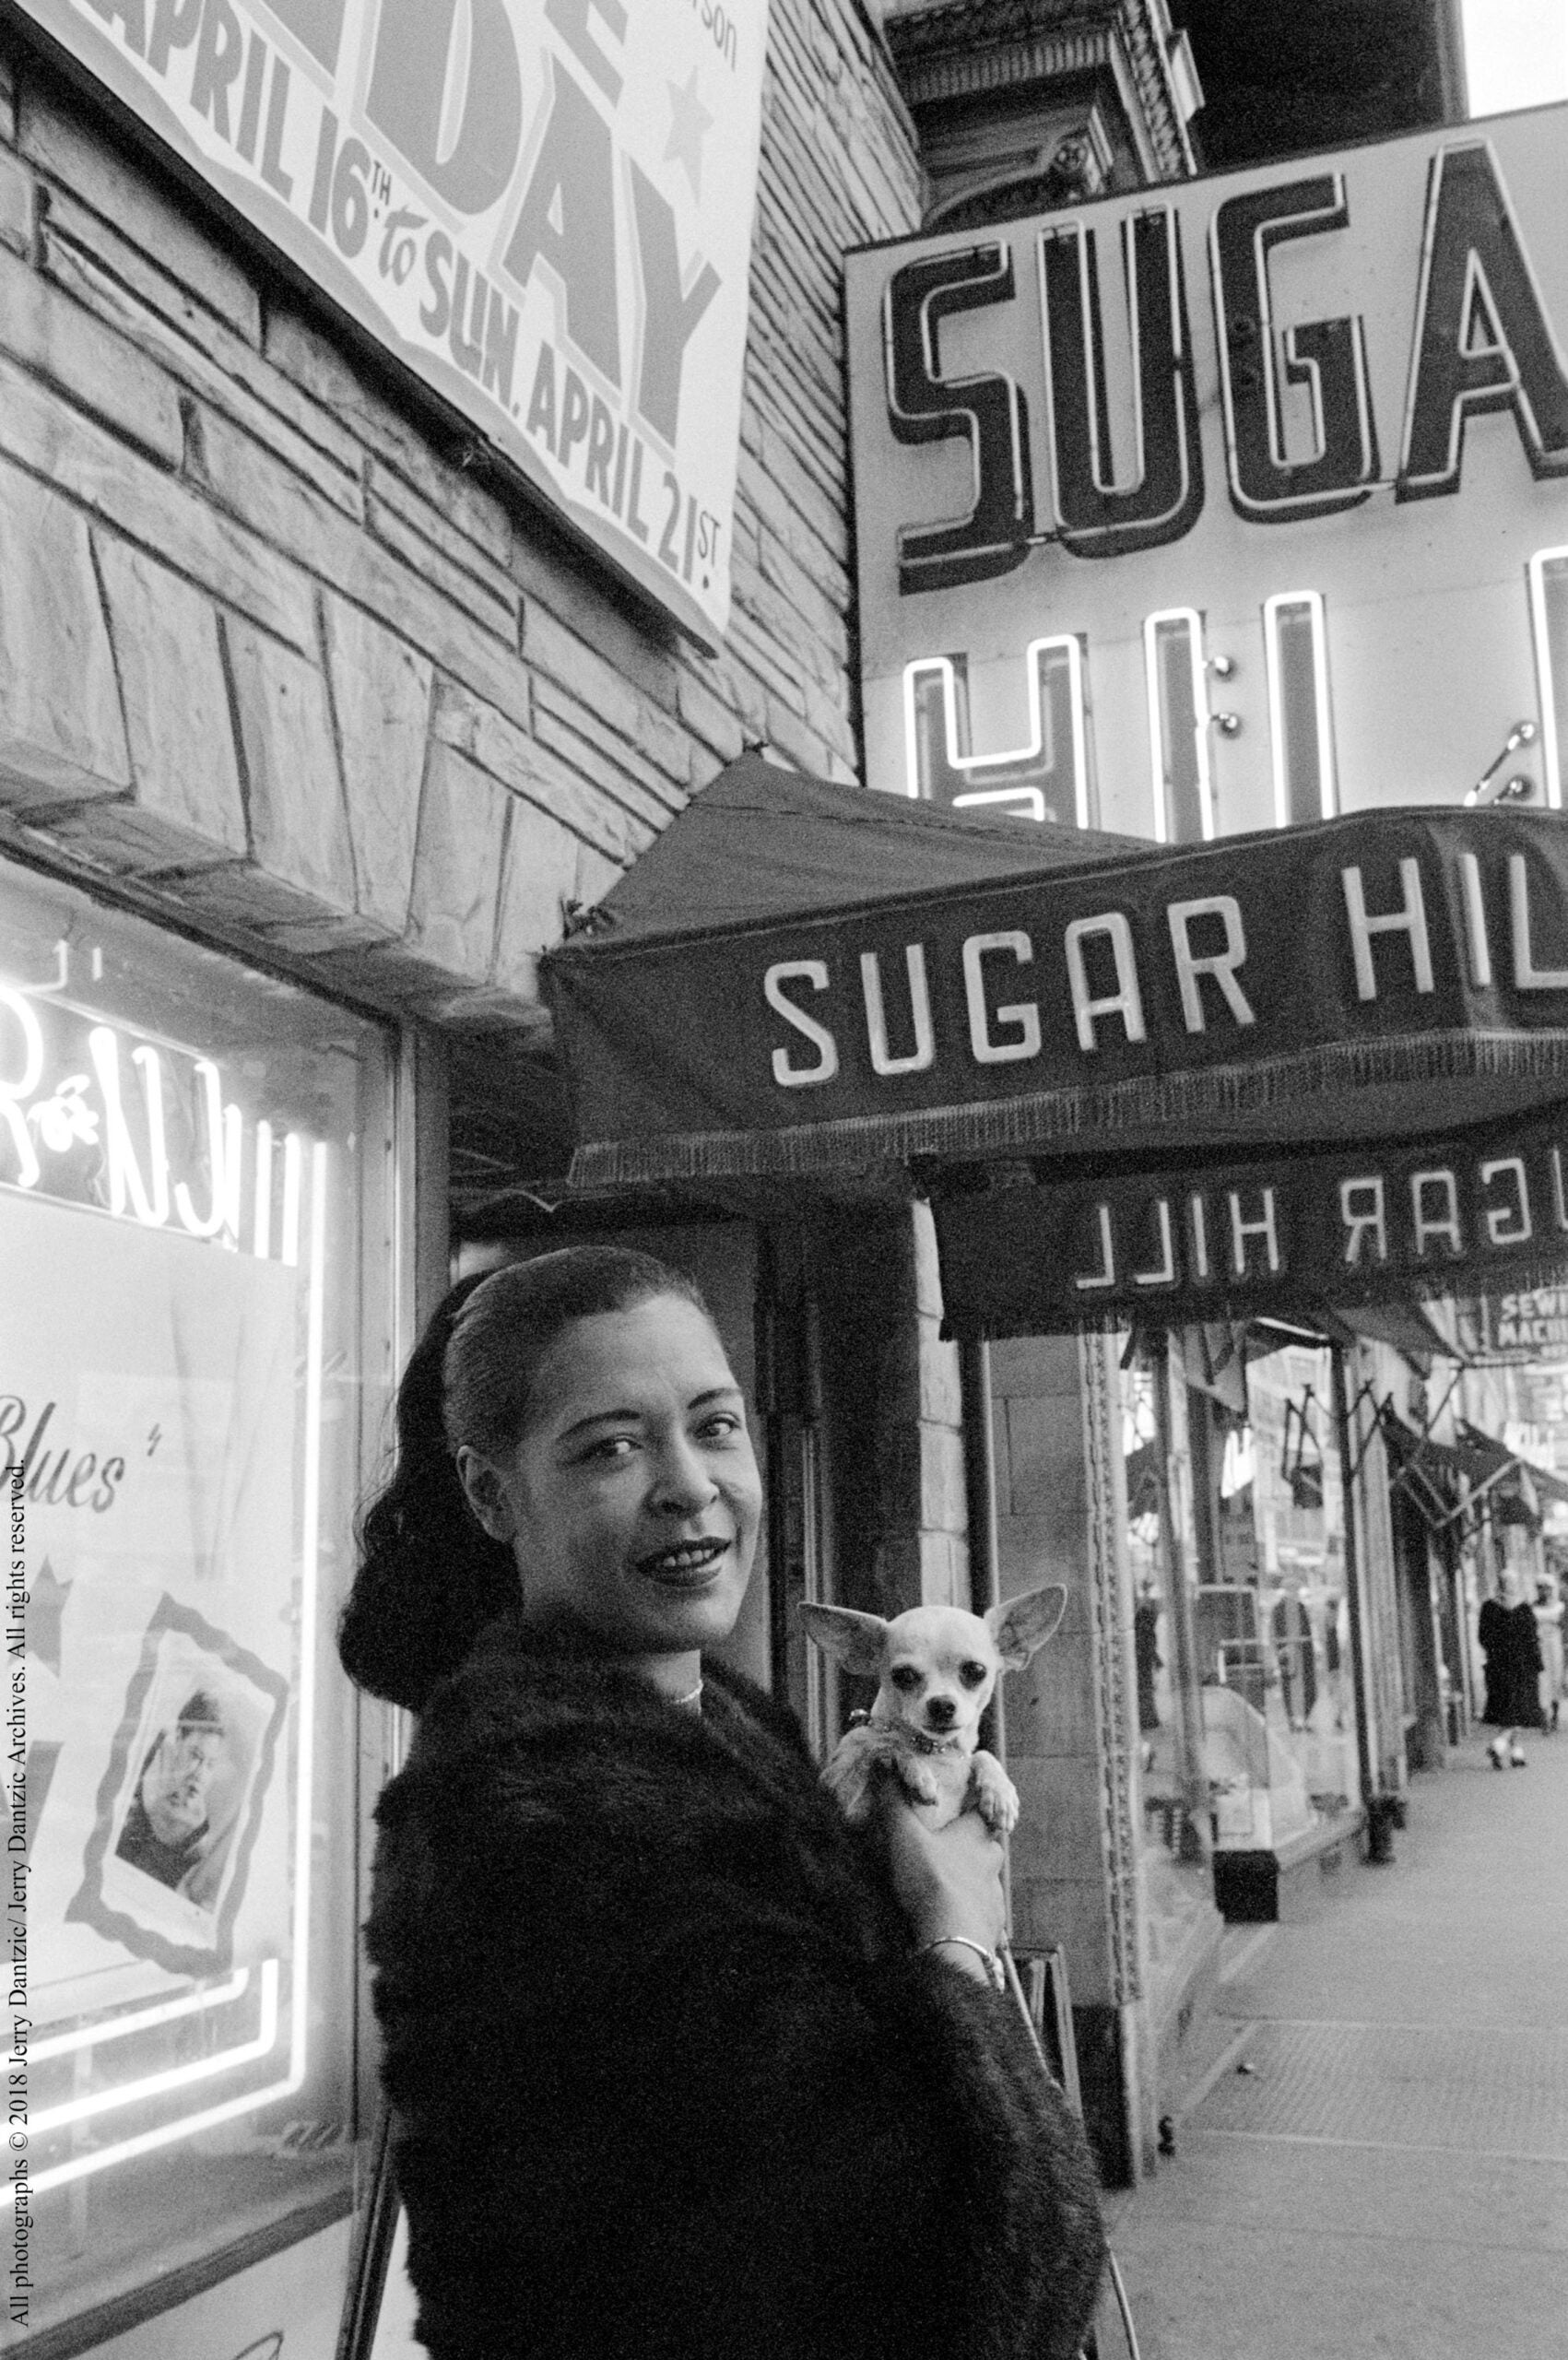 Billie Holiday holding her pet Chihuahua, Pepi, in front of Sugar Hill, Newark, New Jersey